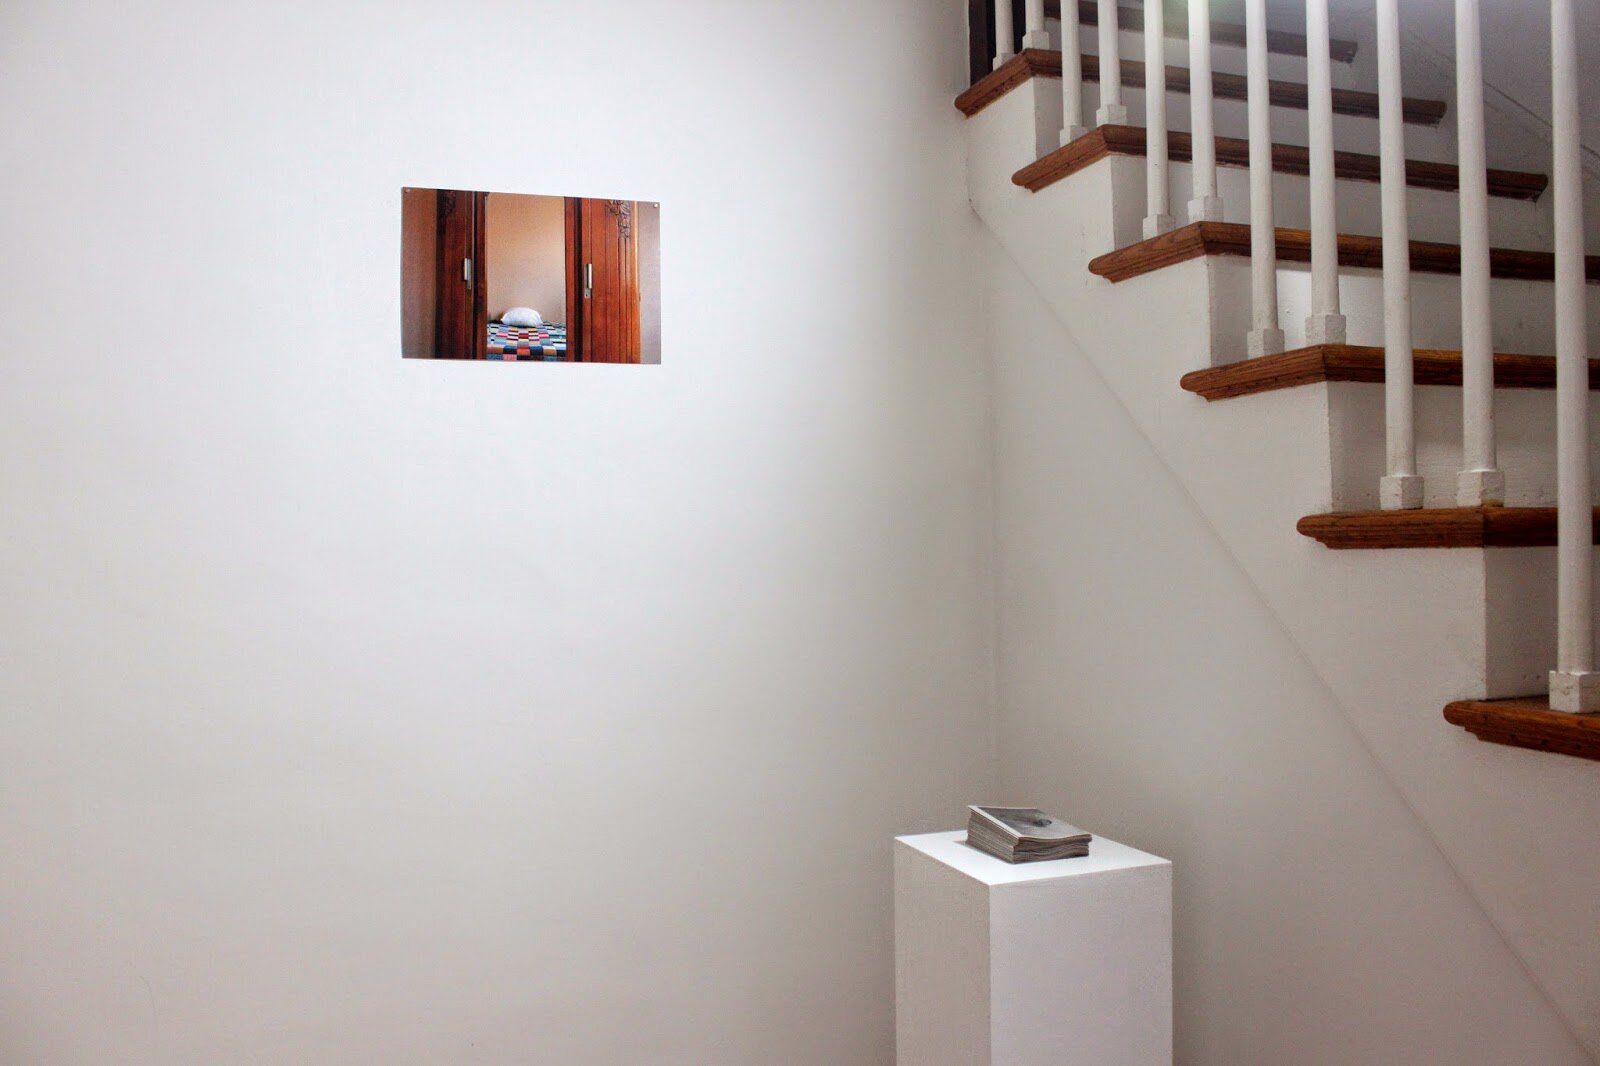  installation view with photographs from&nbsp;  Chambres   &nbsp; (2005) and the publication,&nbsp; Taysir Batniji: Full Bleed  